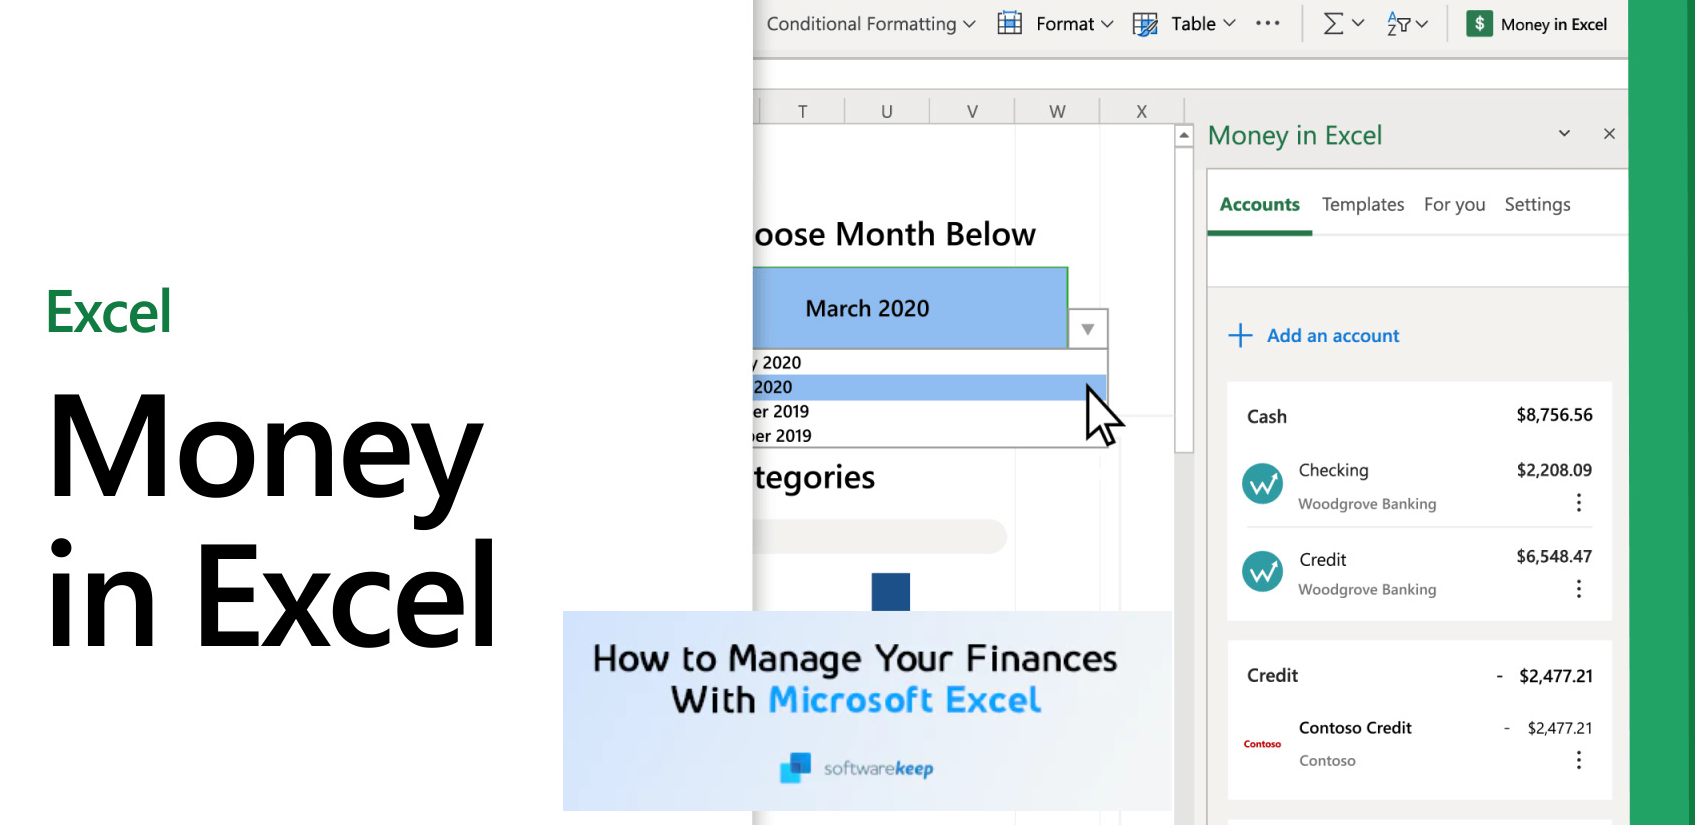 How to Manage Your Finances With Microsoft Excel